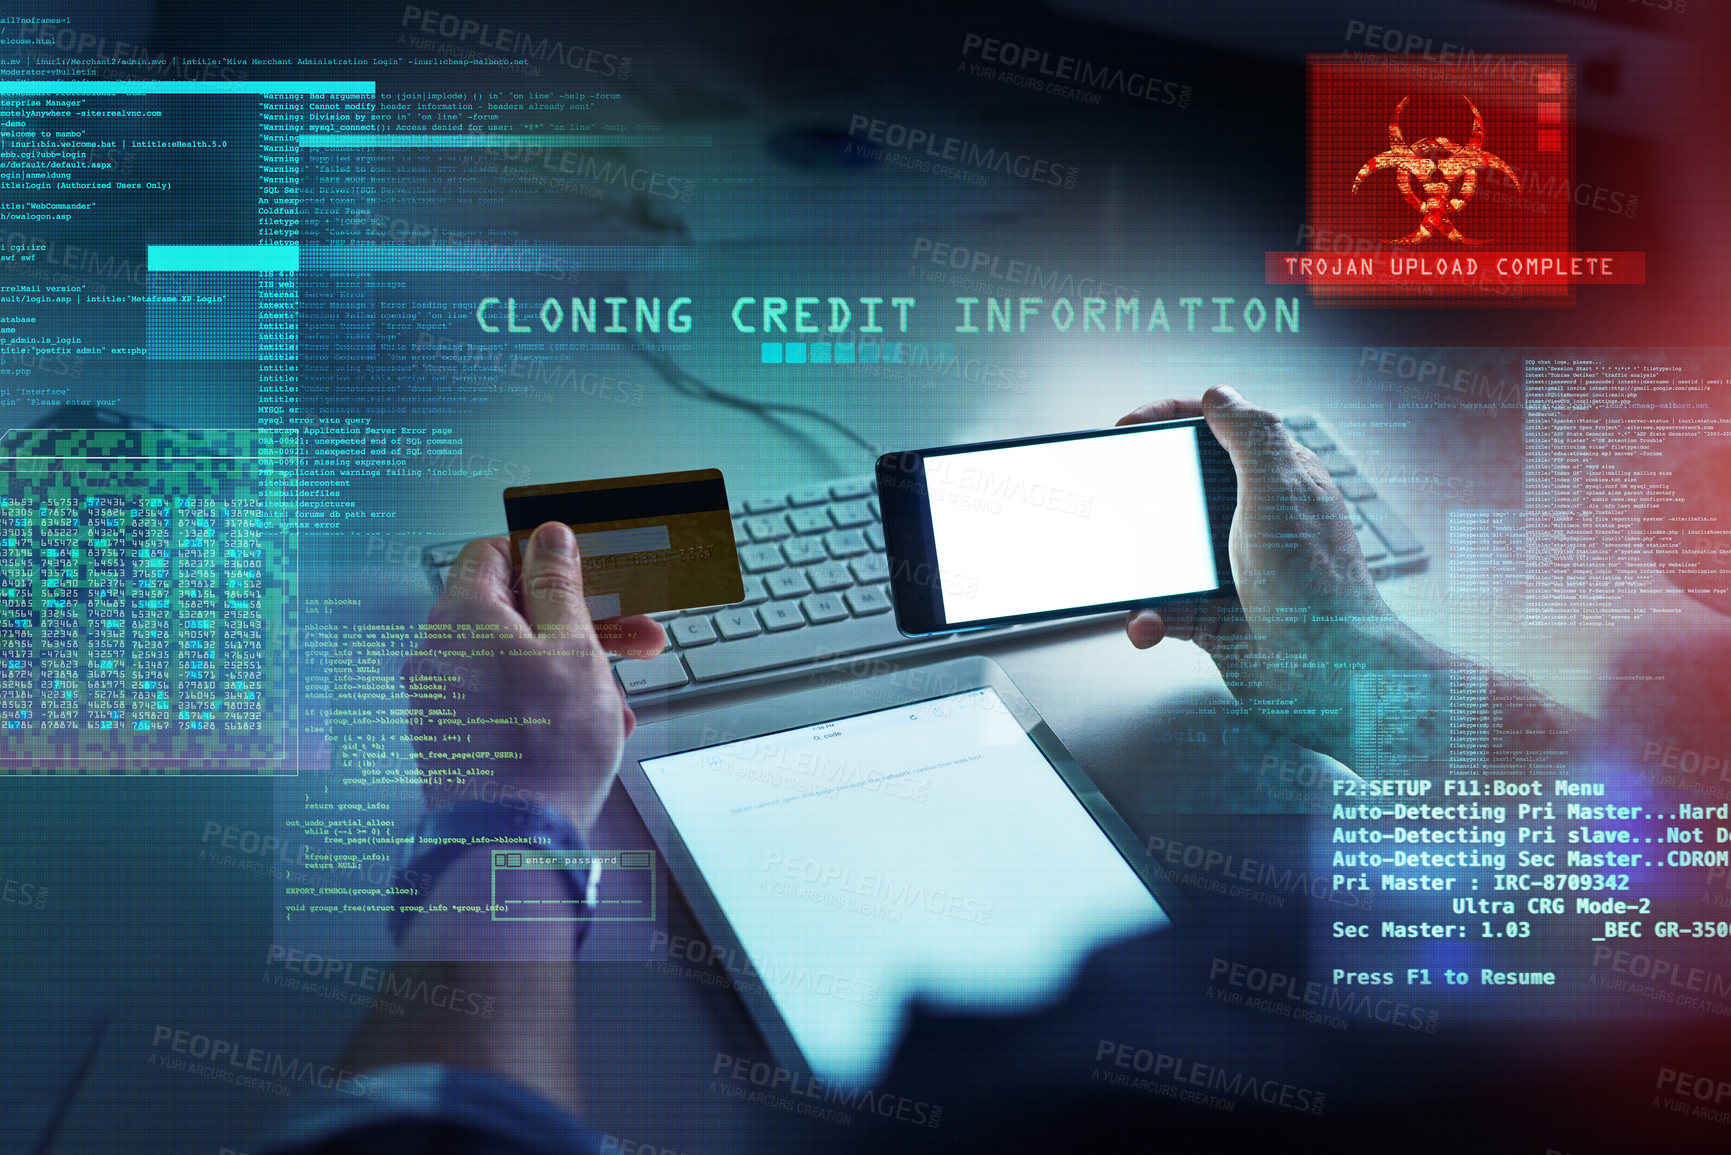 Buy stock photo Cyber security, hacking and fraud with a computer hacker holding a credit card and phone while cloning a bank account. Theft, crime and data protection with CGI, special effects or overlay background